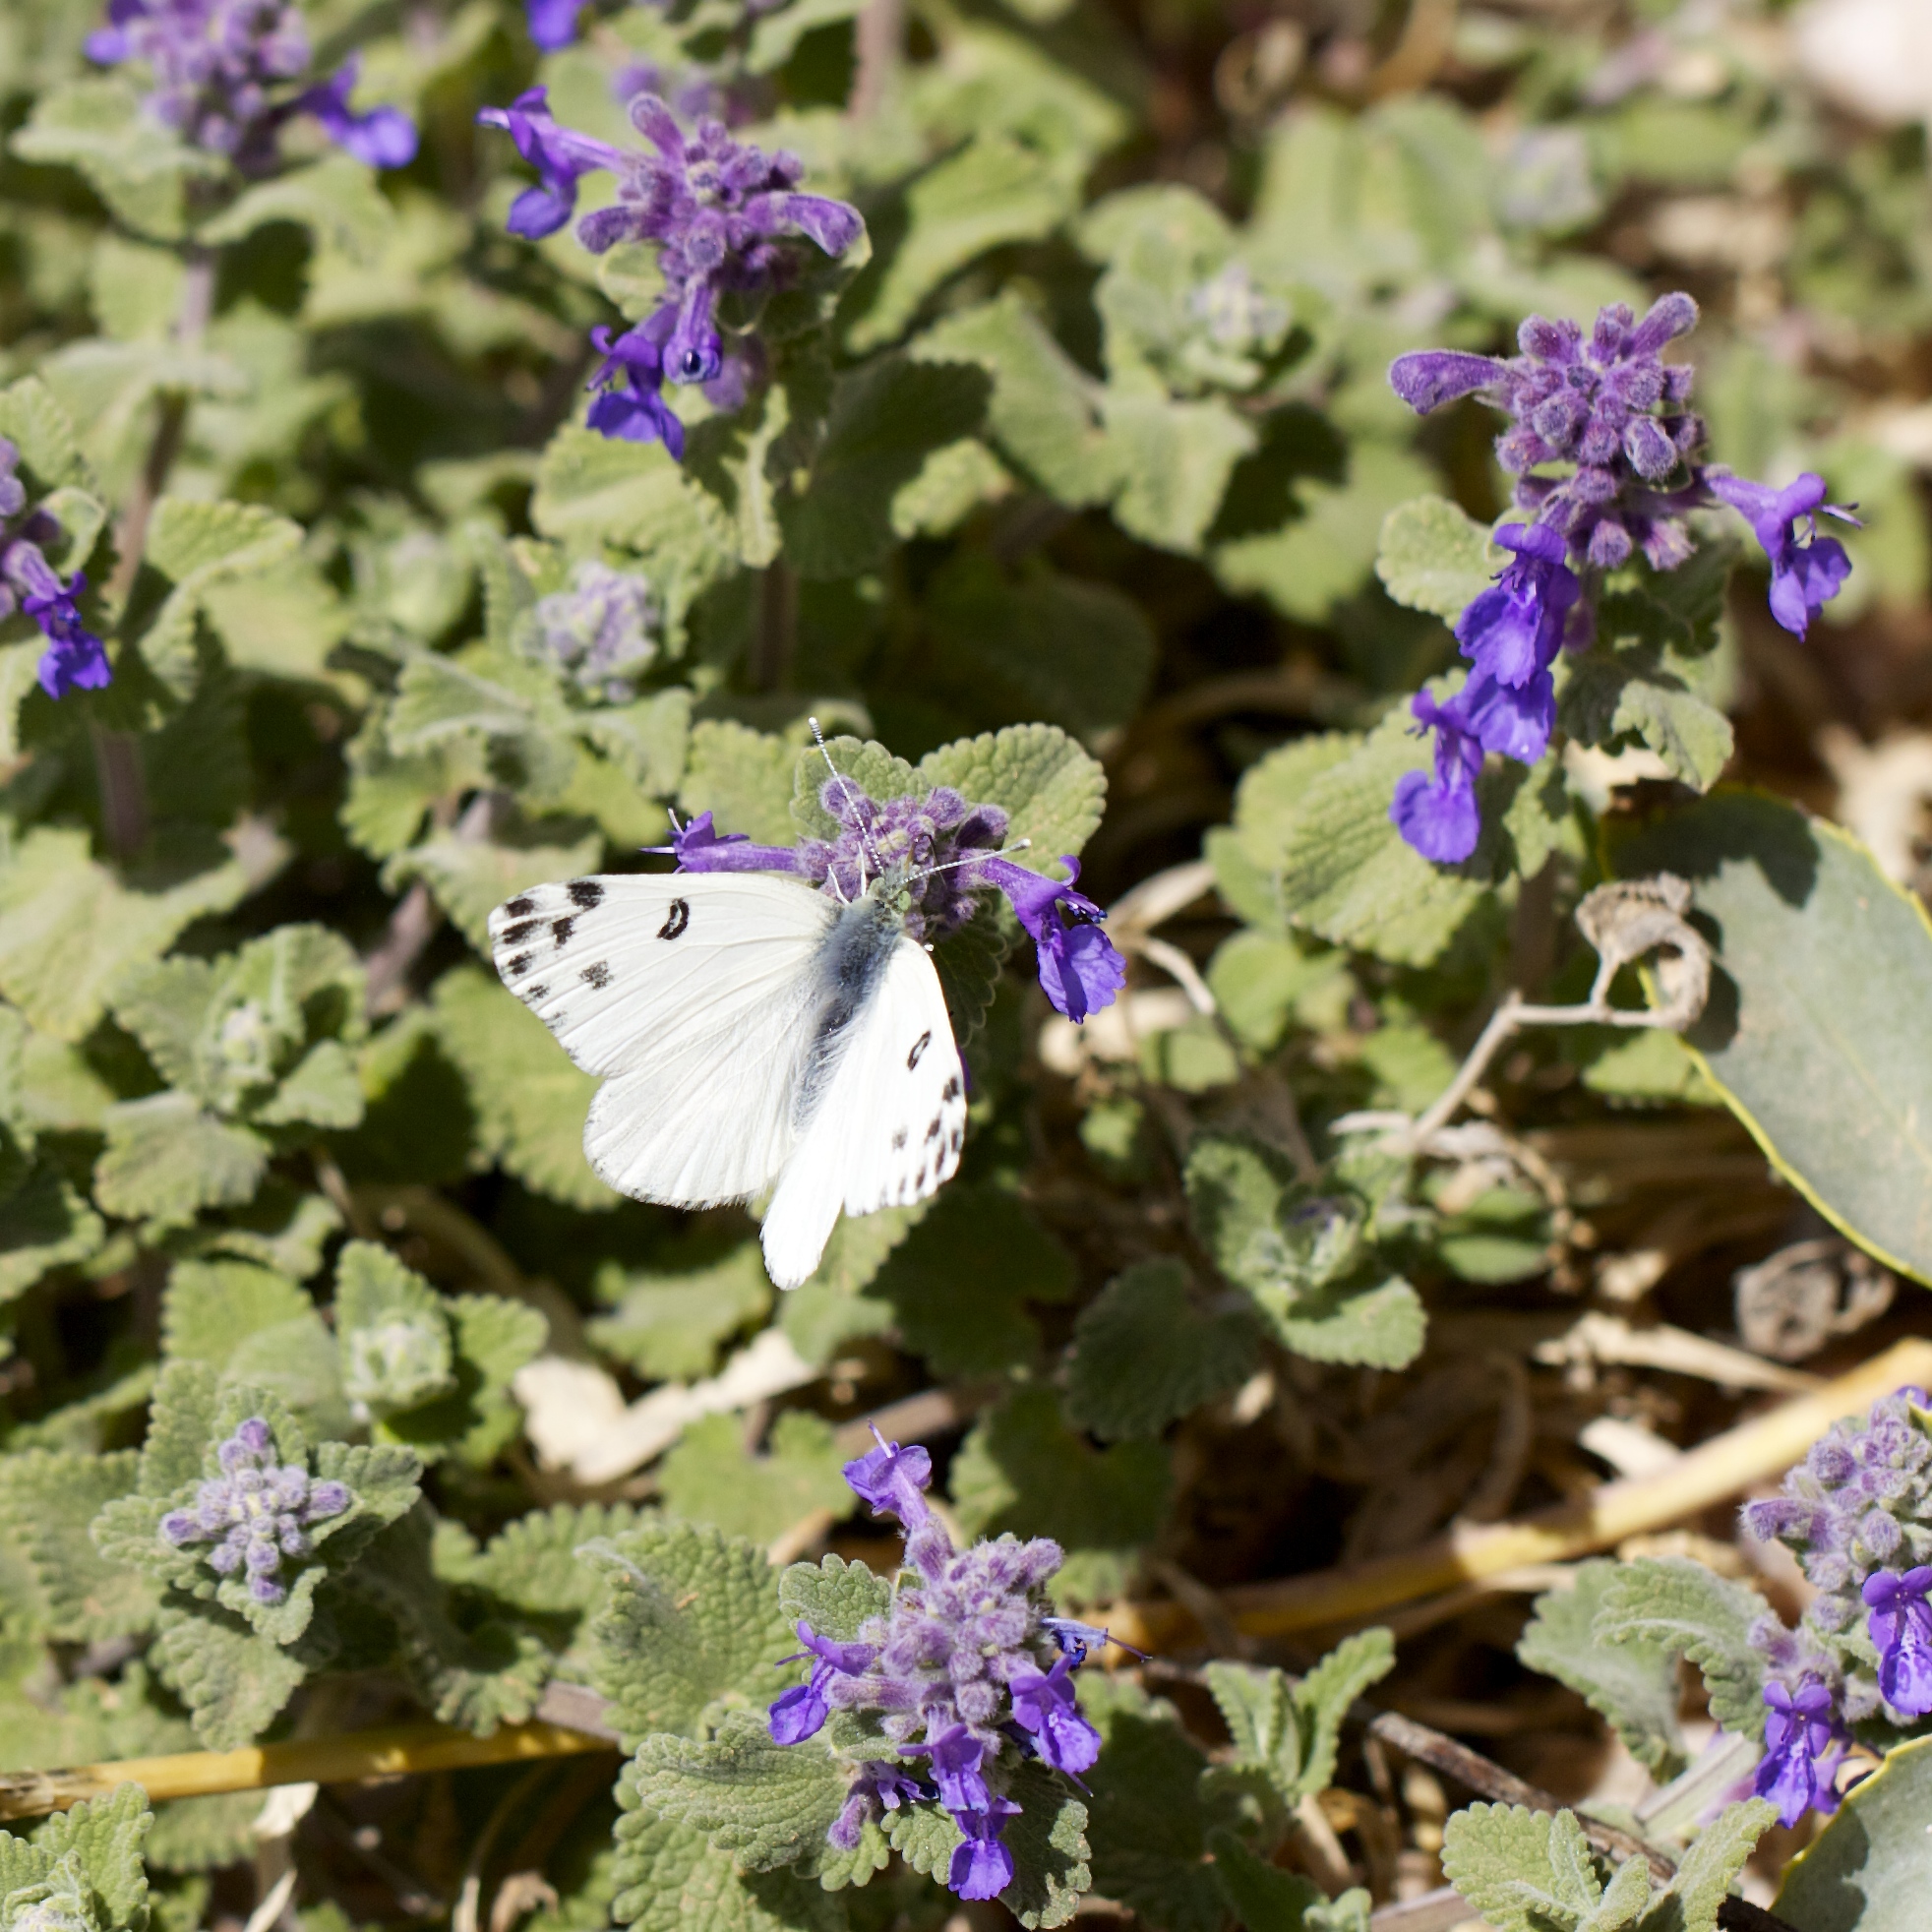 In quest of the elusive white butterfly, moving too fast for me to get close, flittering through the nepeta.